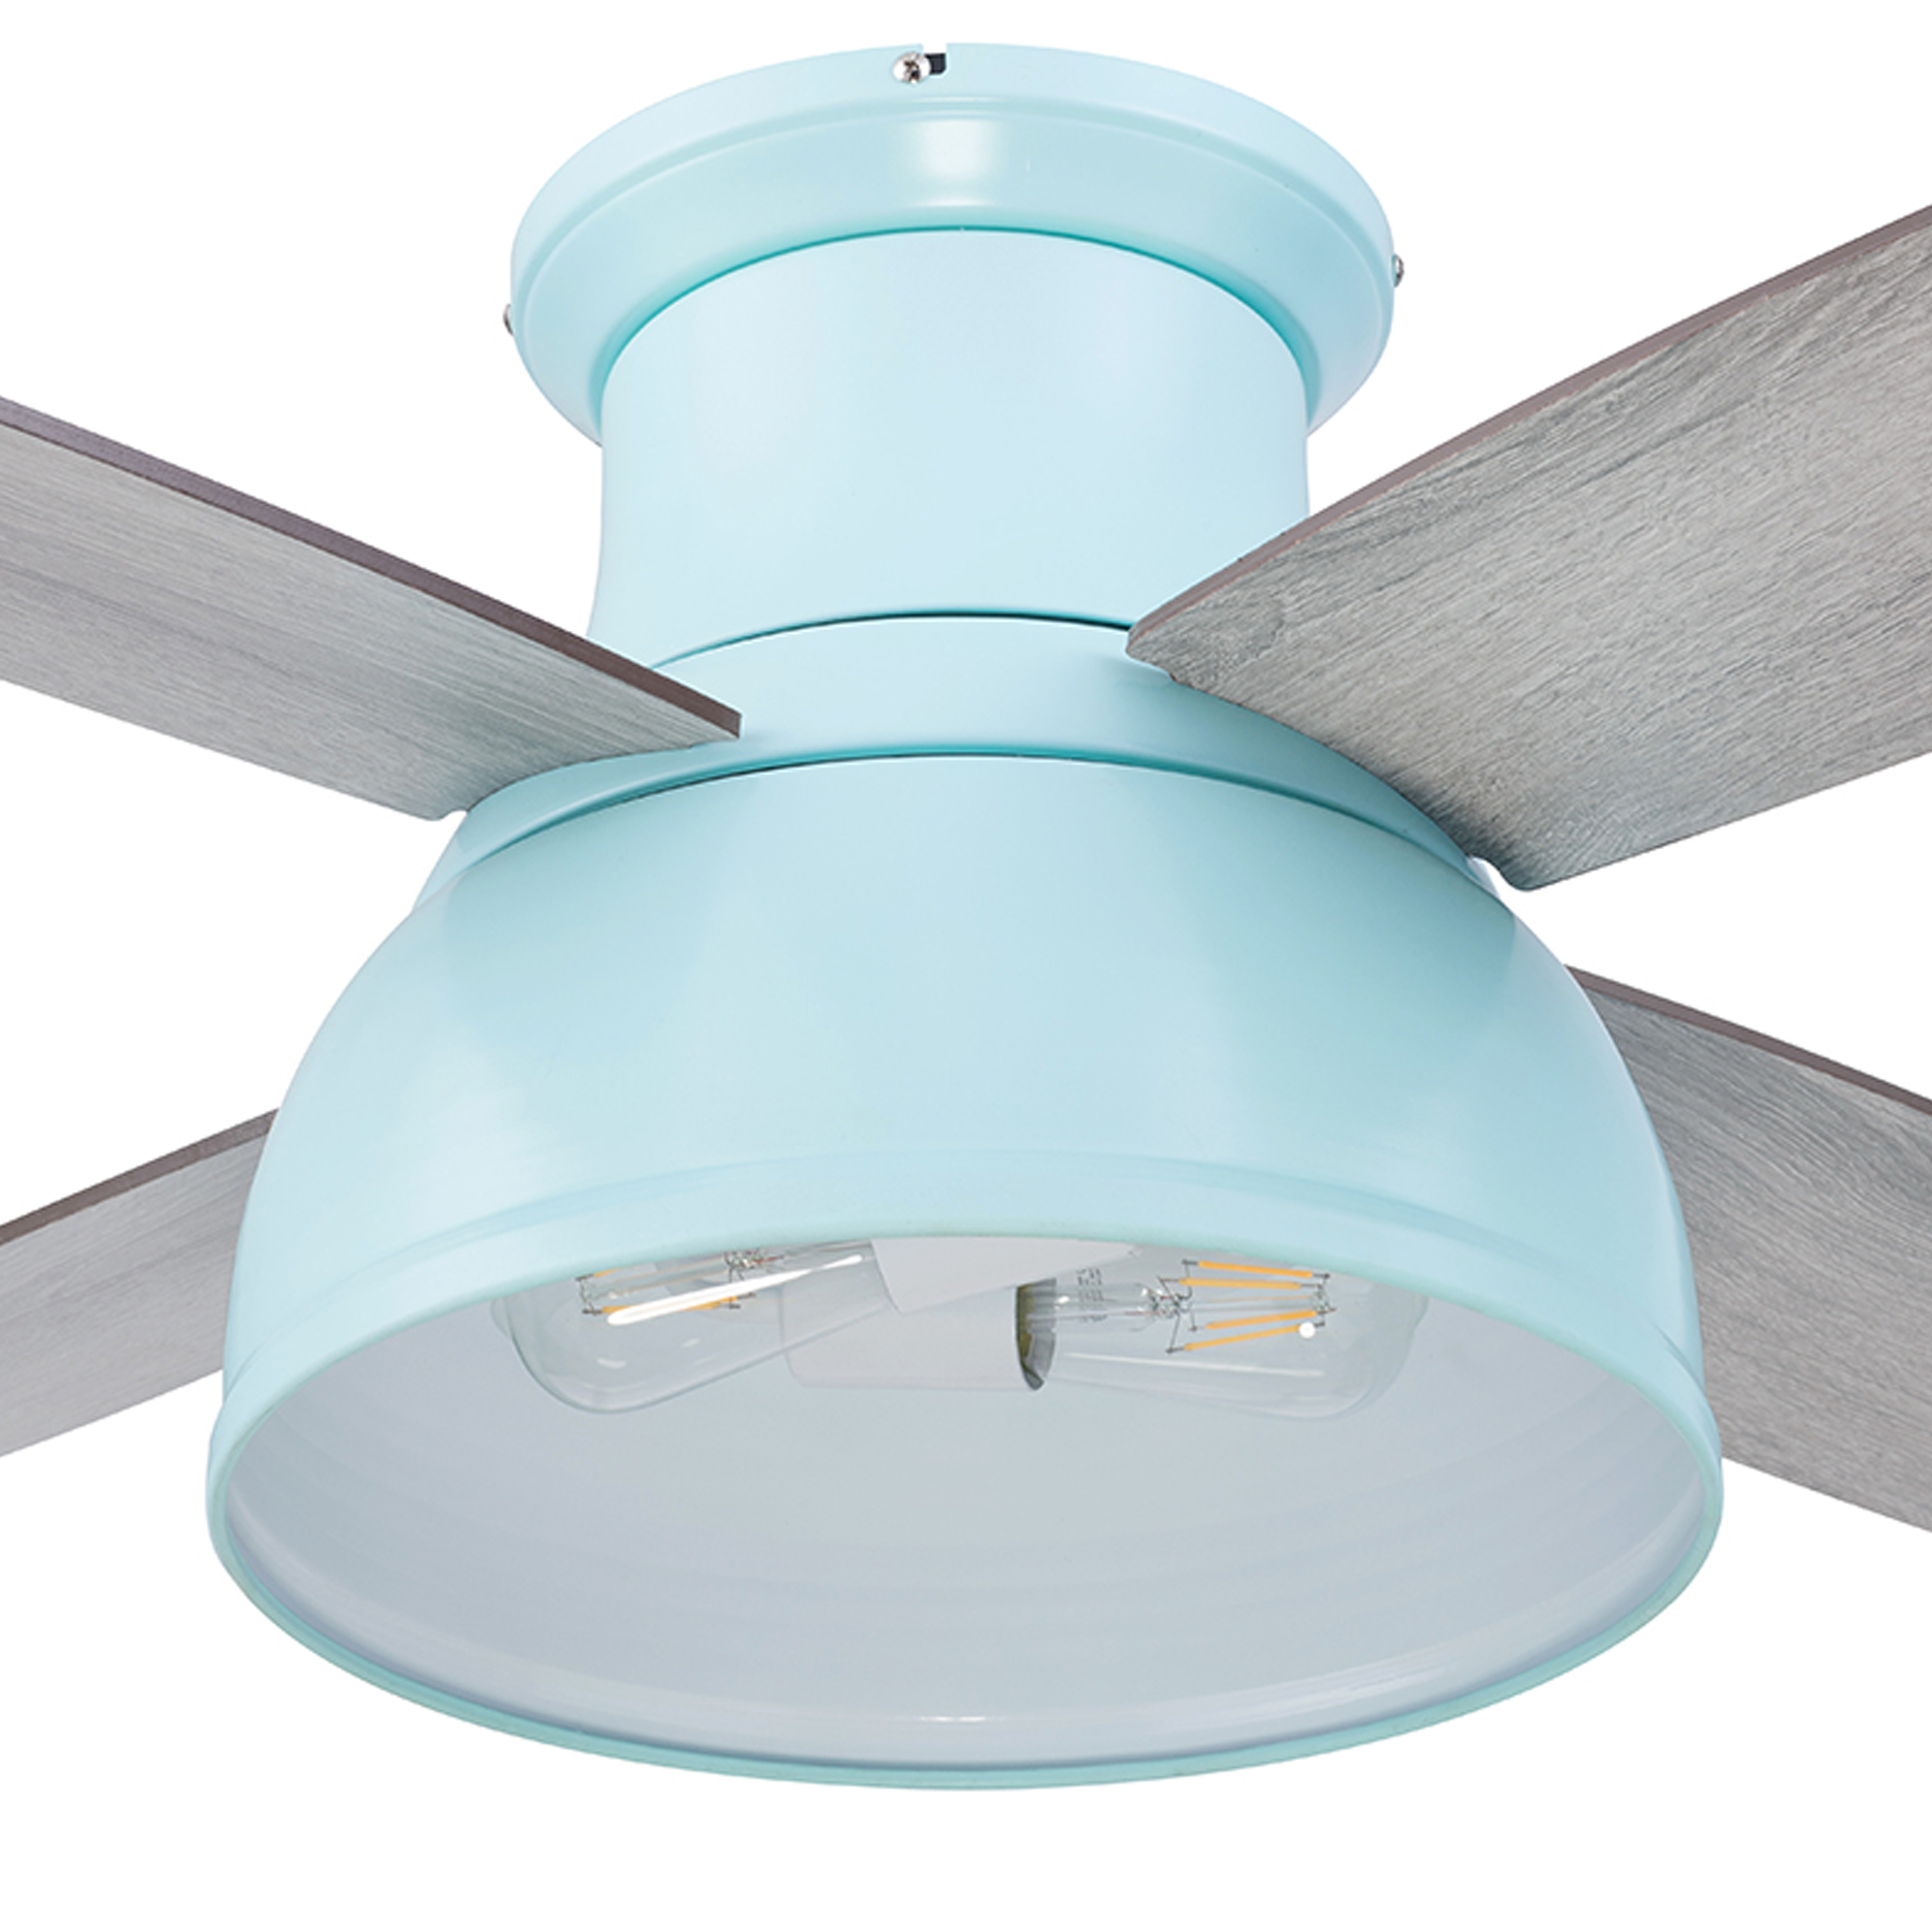 52 Inch Edora, Seafoam, Remote Control, Ceiling Fan by Prominence Home